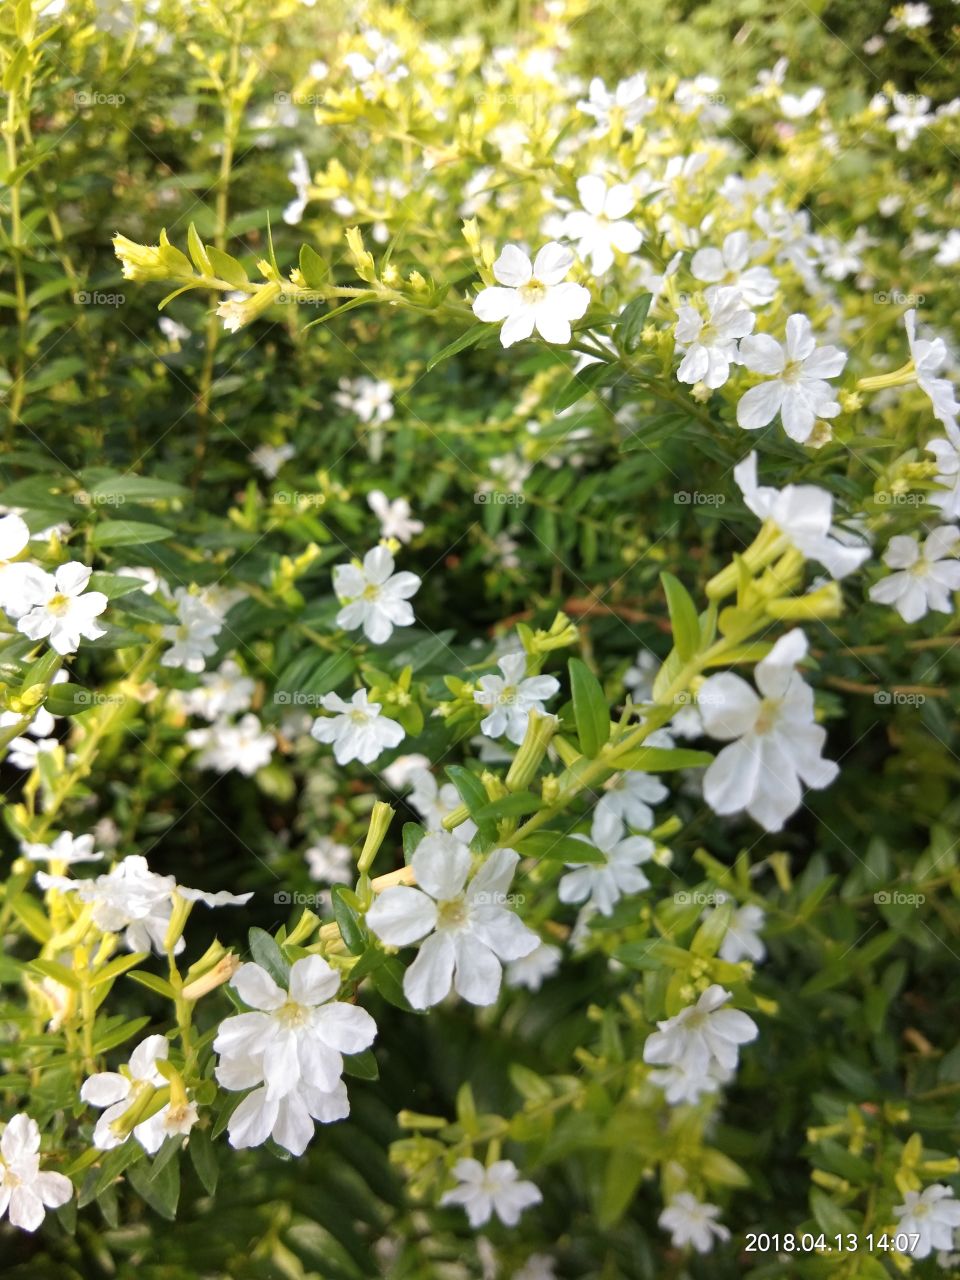 a clump. of white flowers